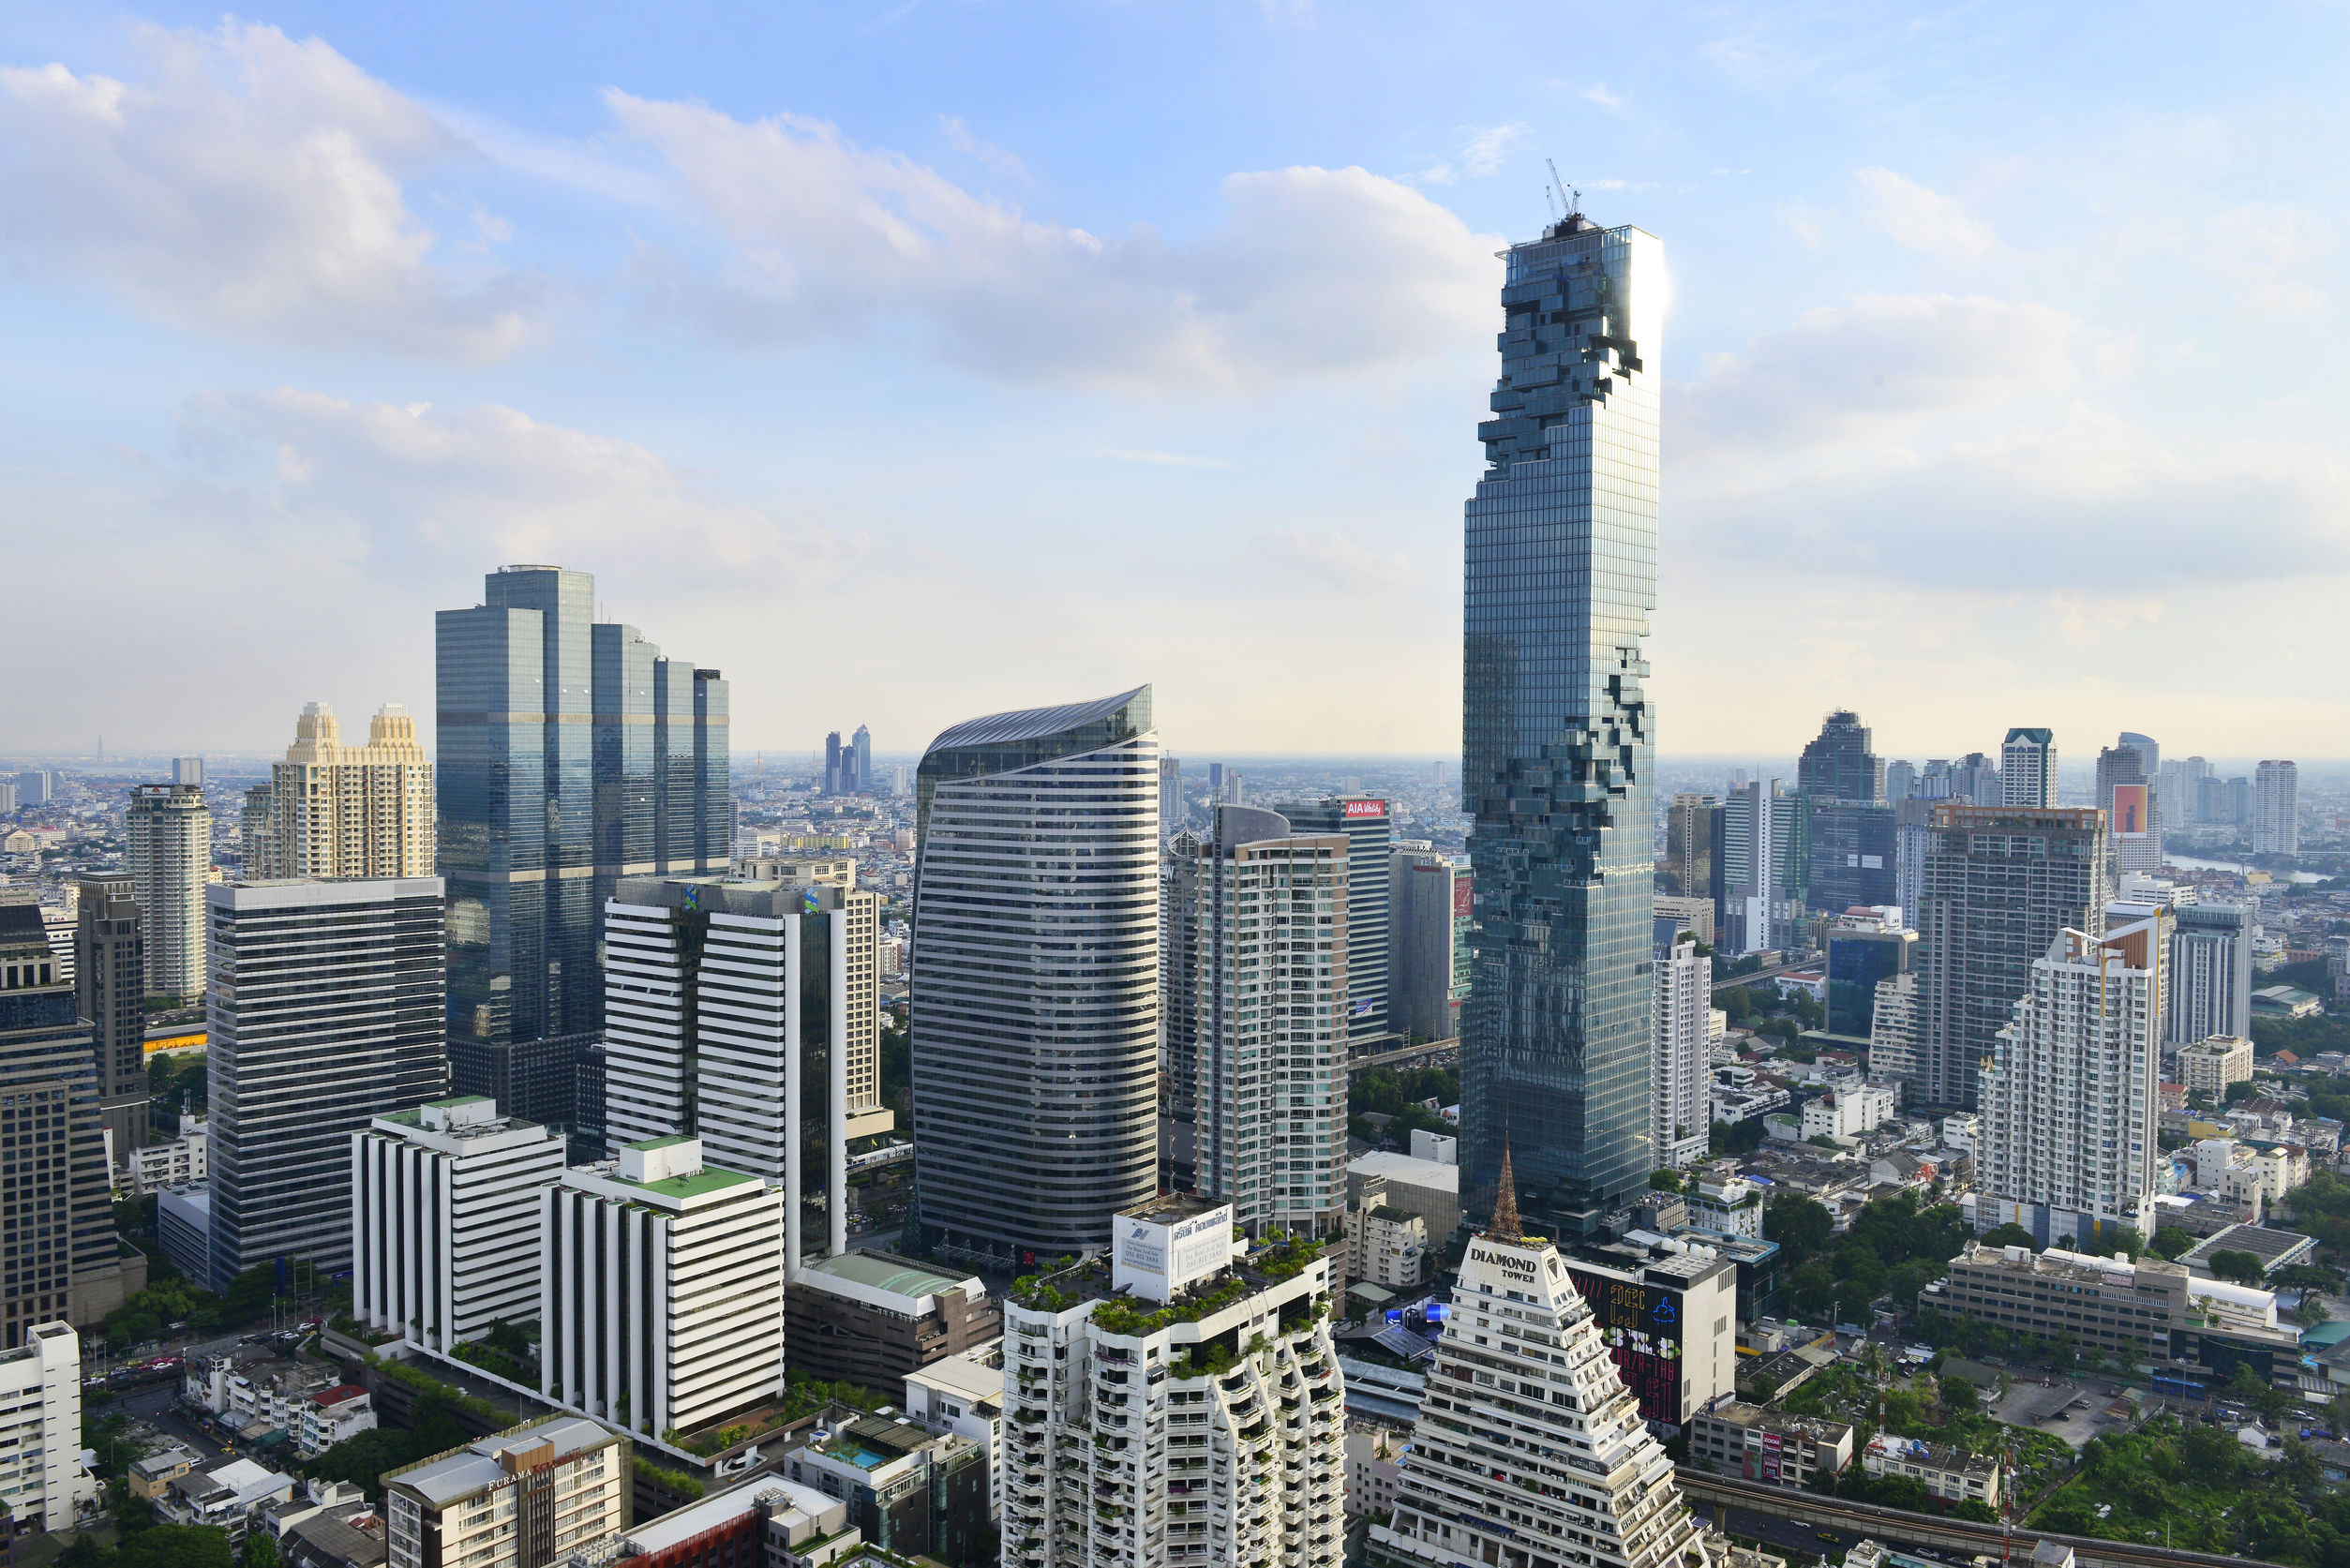 Chinese appetite for Thai property spicing up